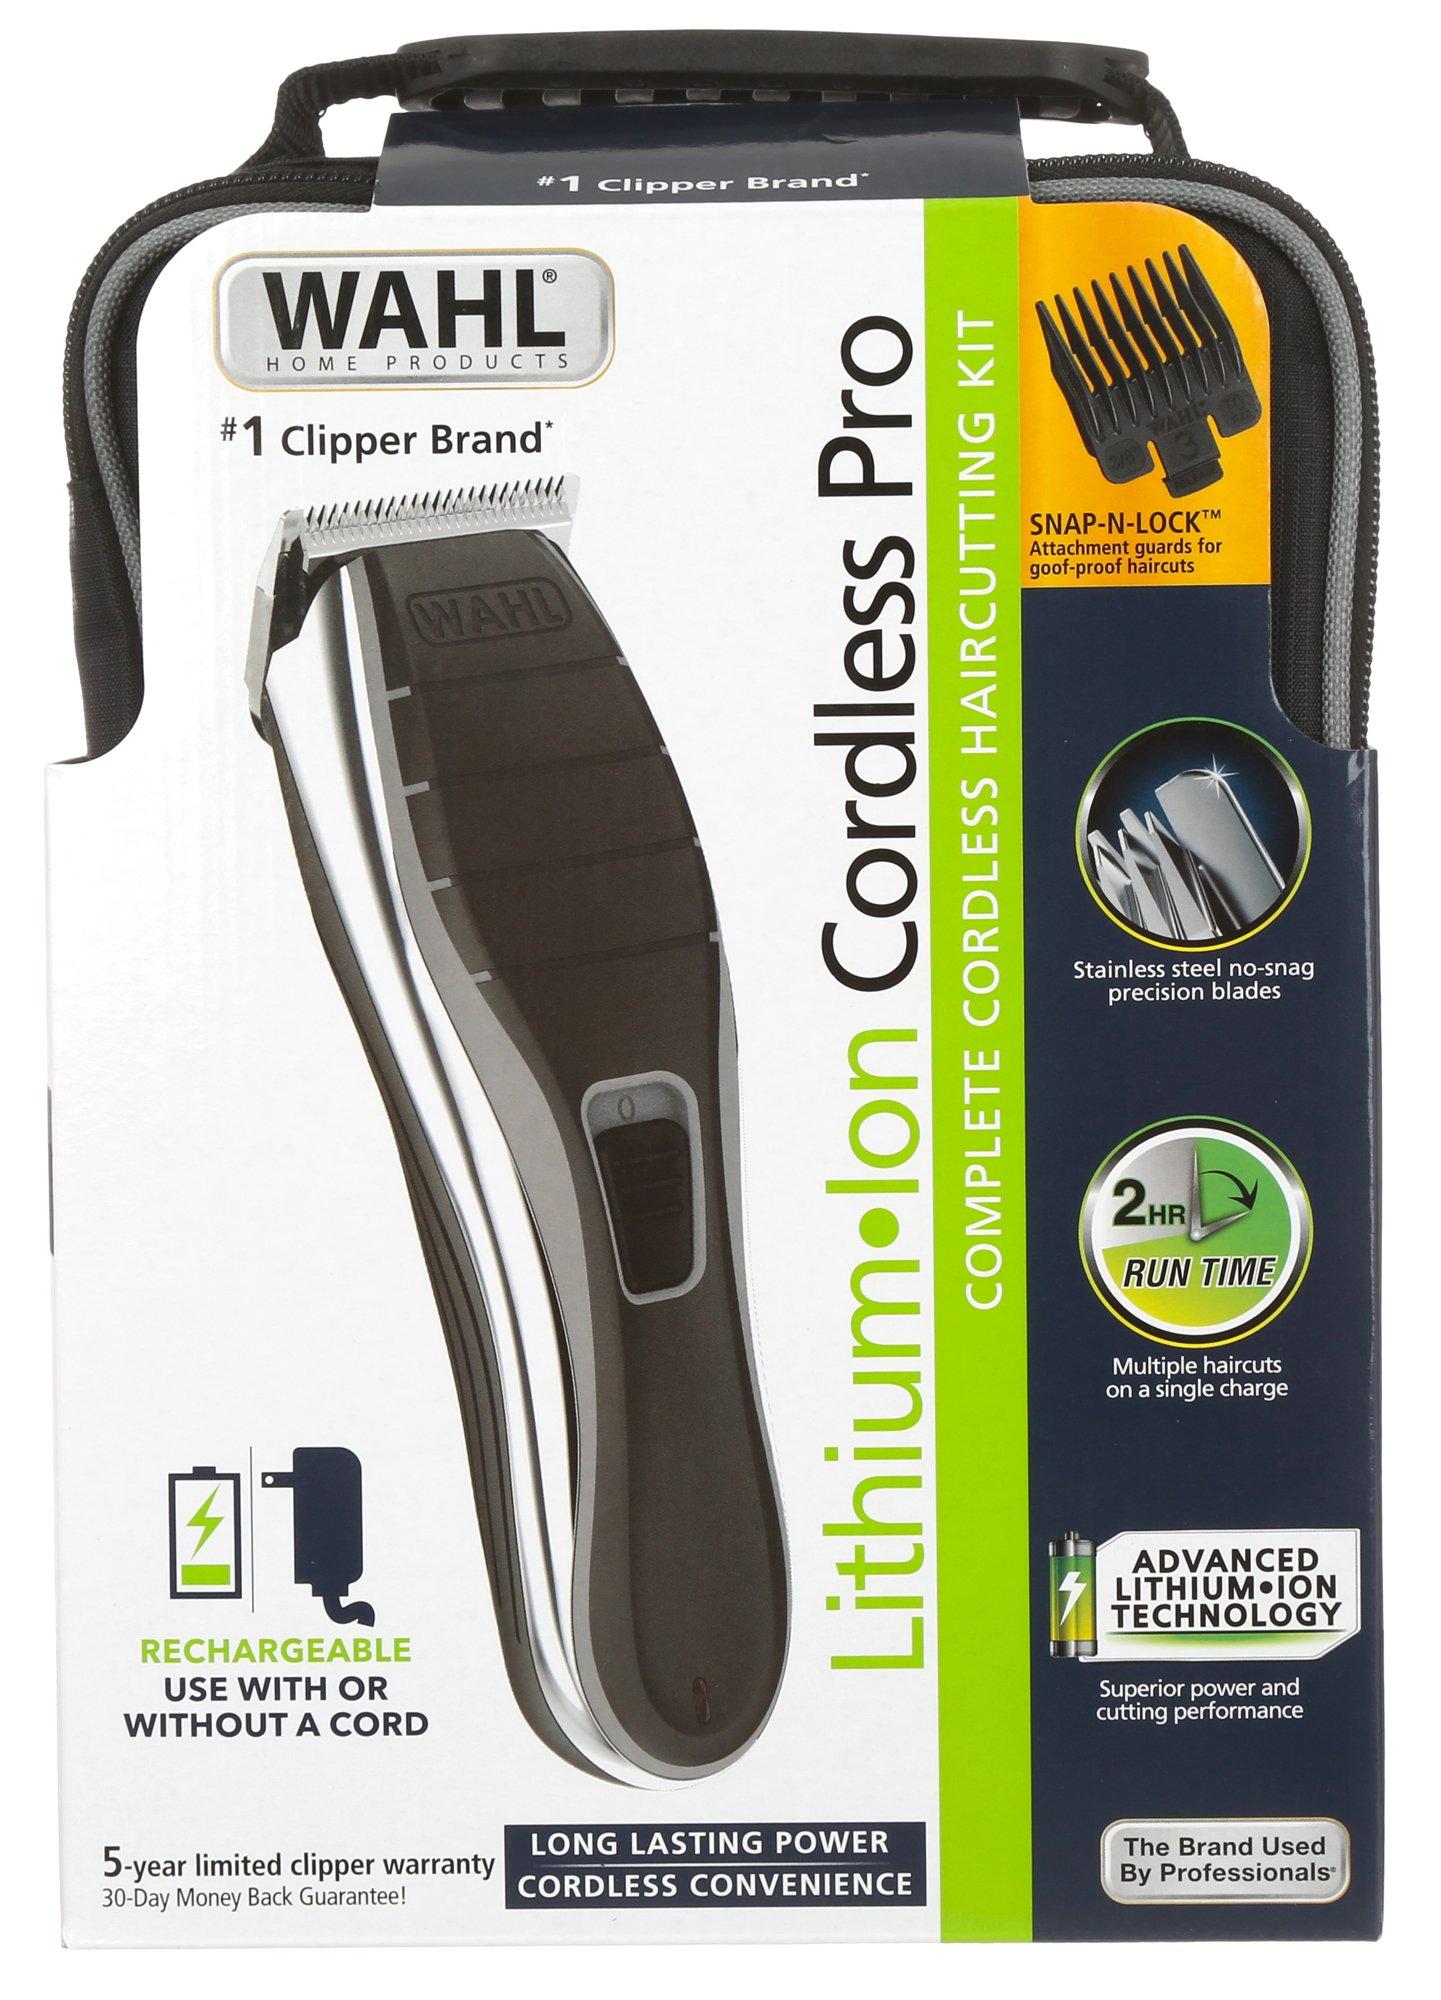 WAHL Lithium-Ion Cordless Haircutting Kit